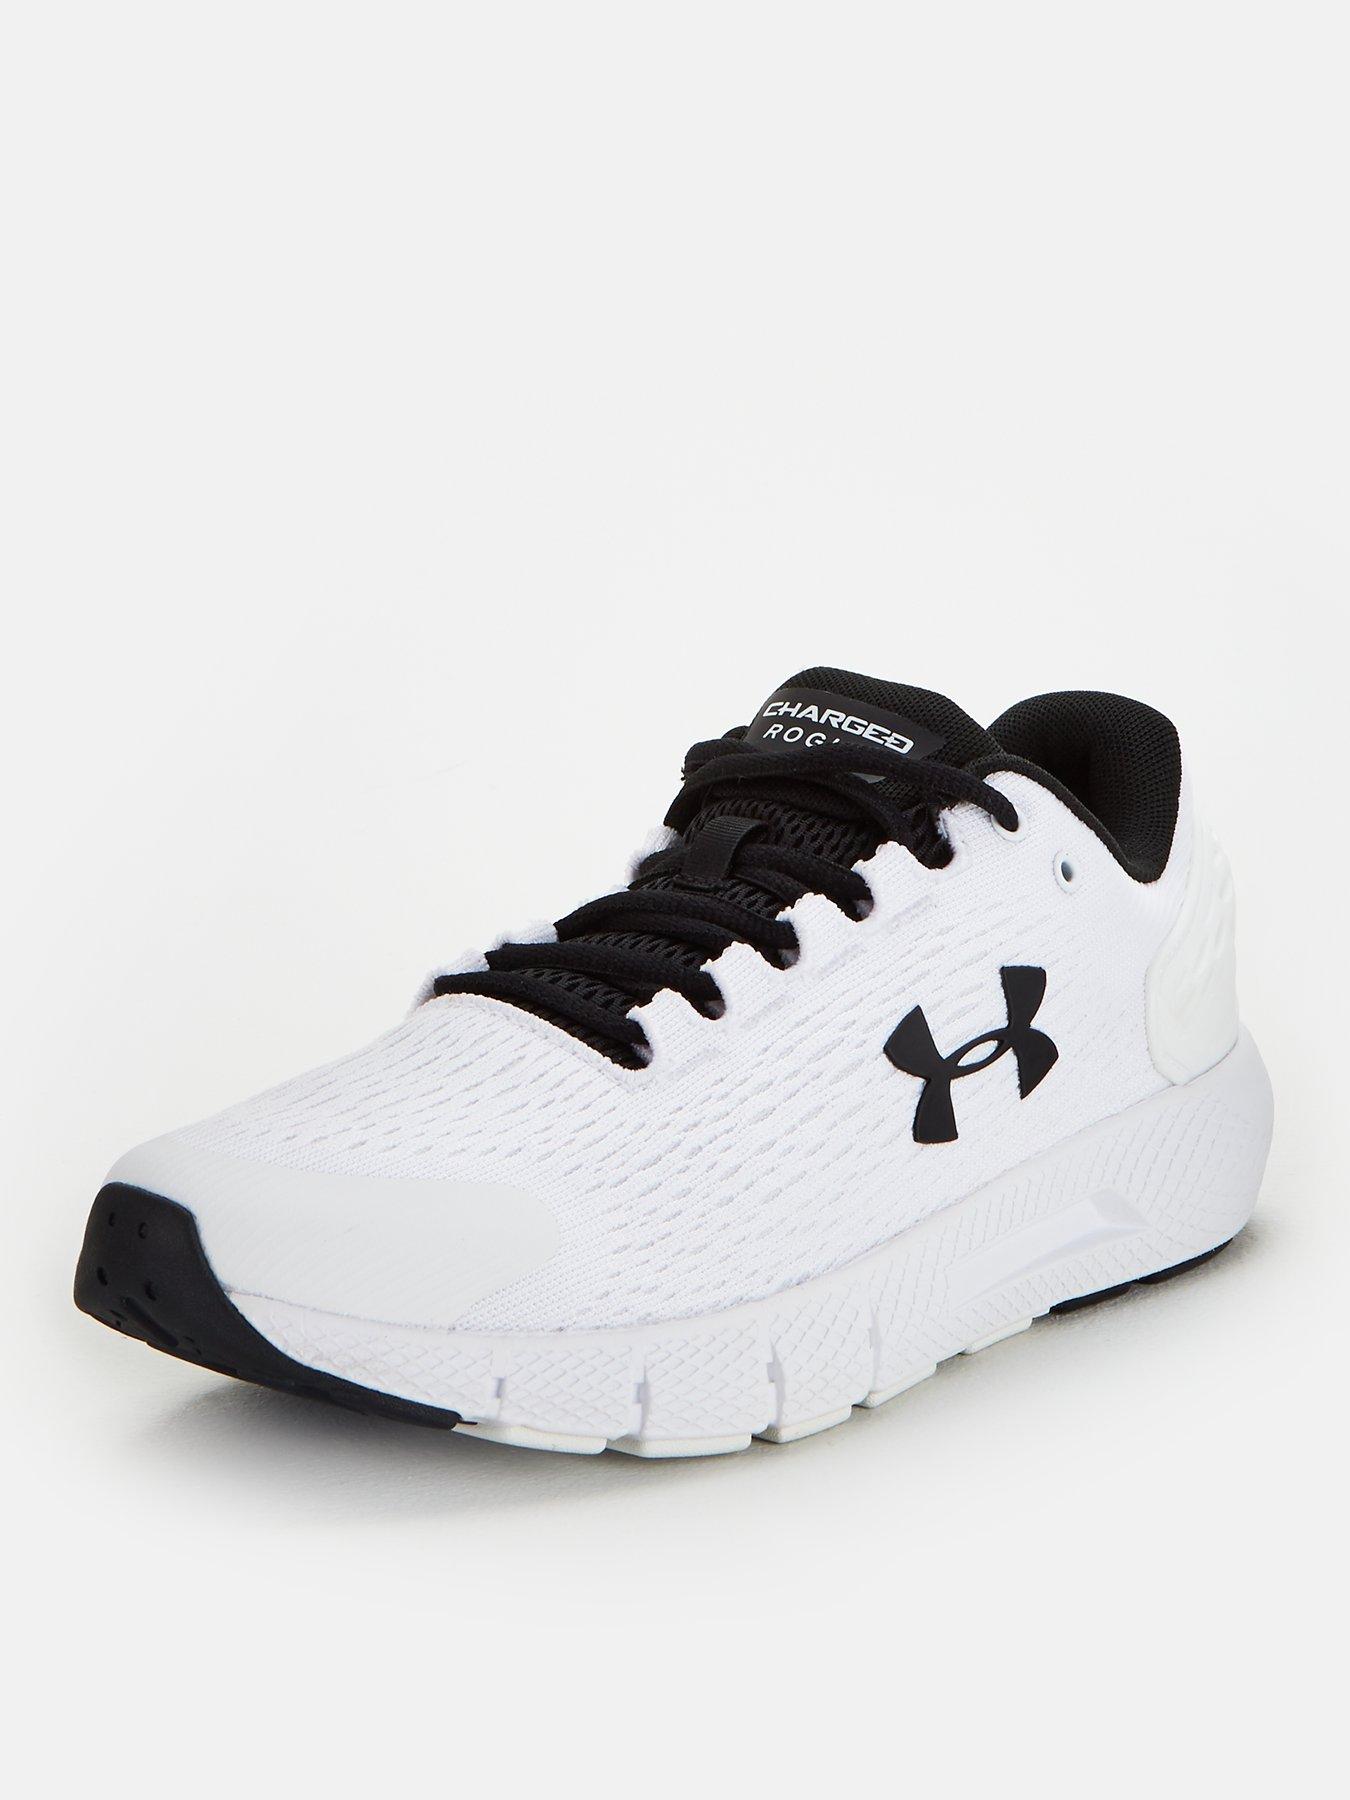 UNDER ARMOUR Charged Rogue 2 - White 